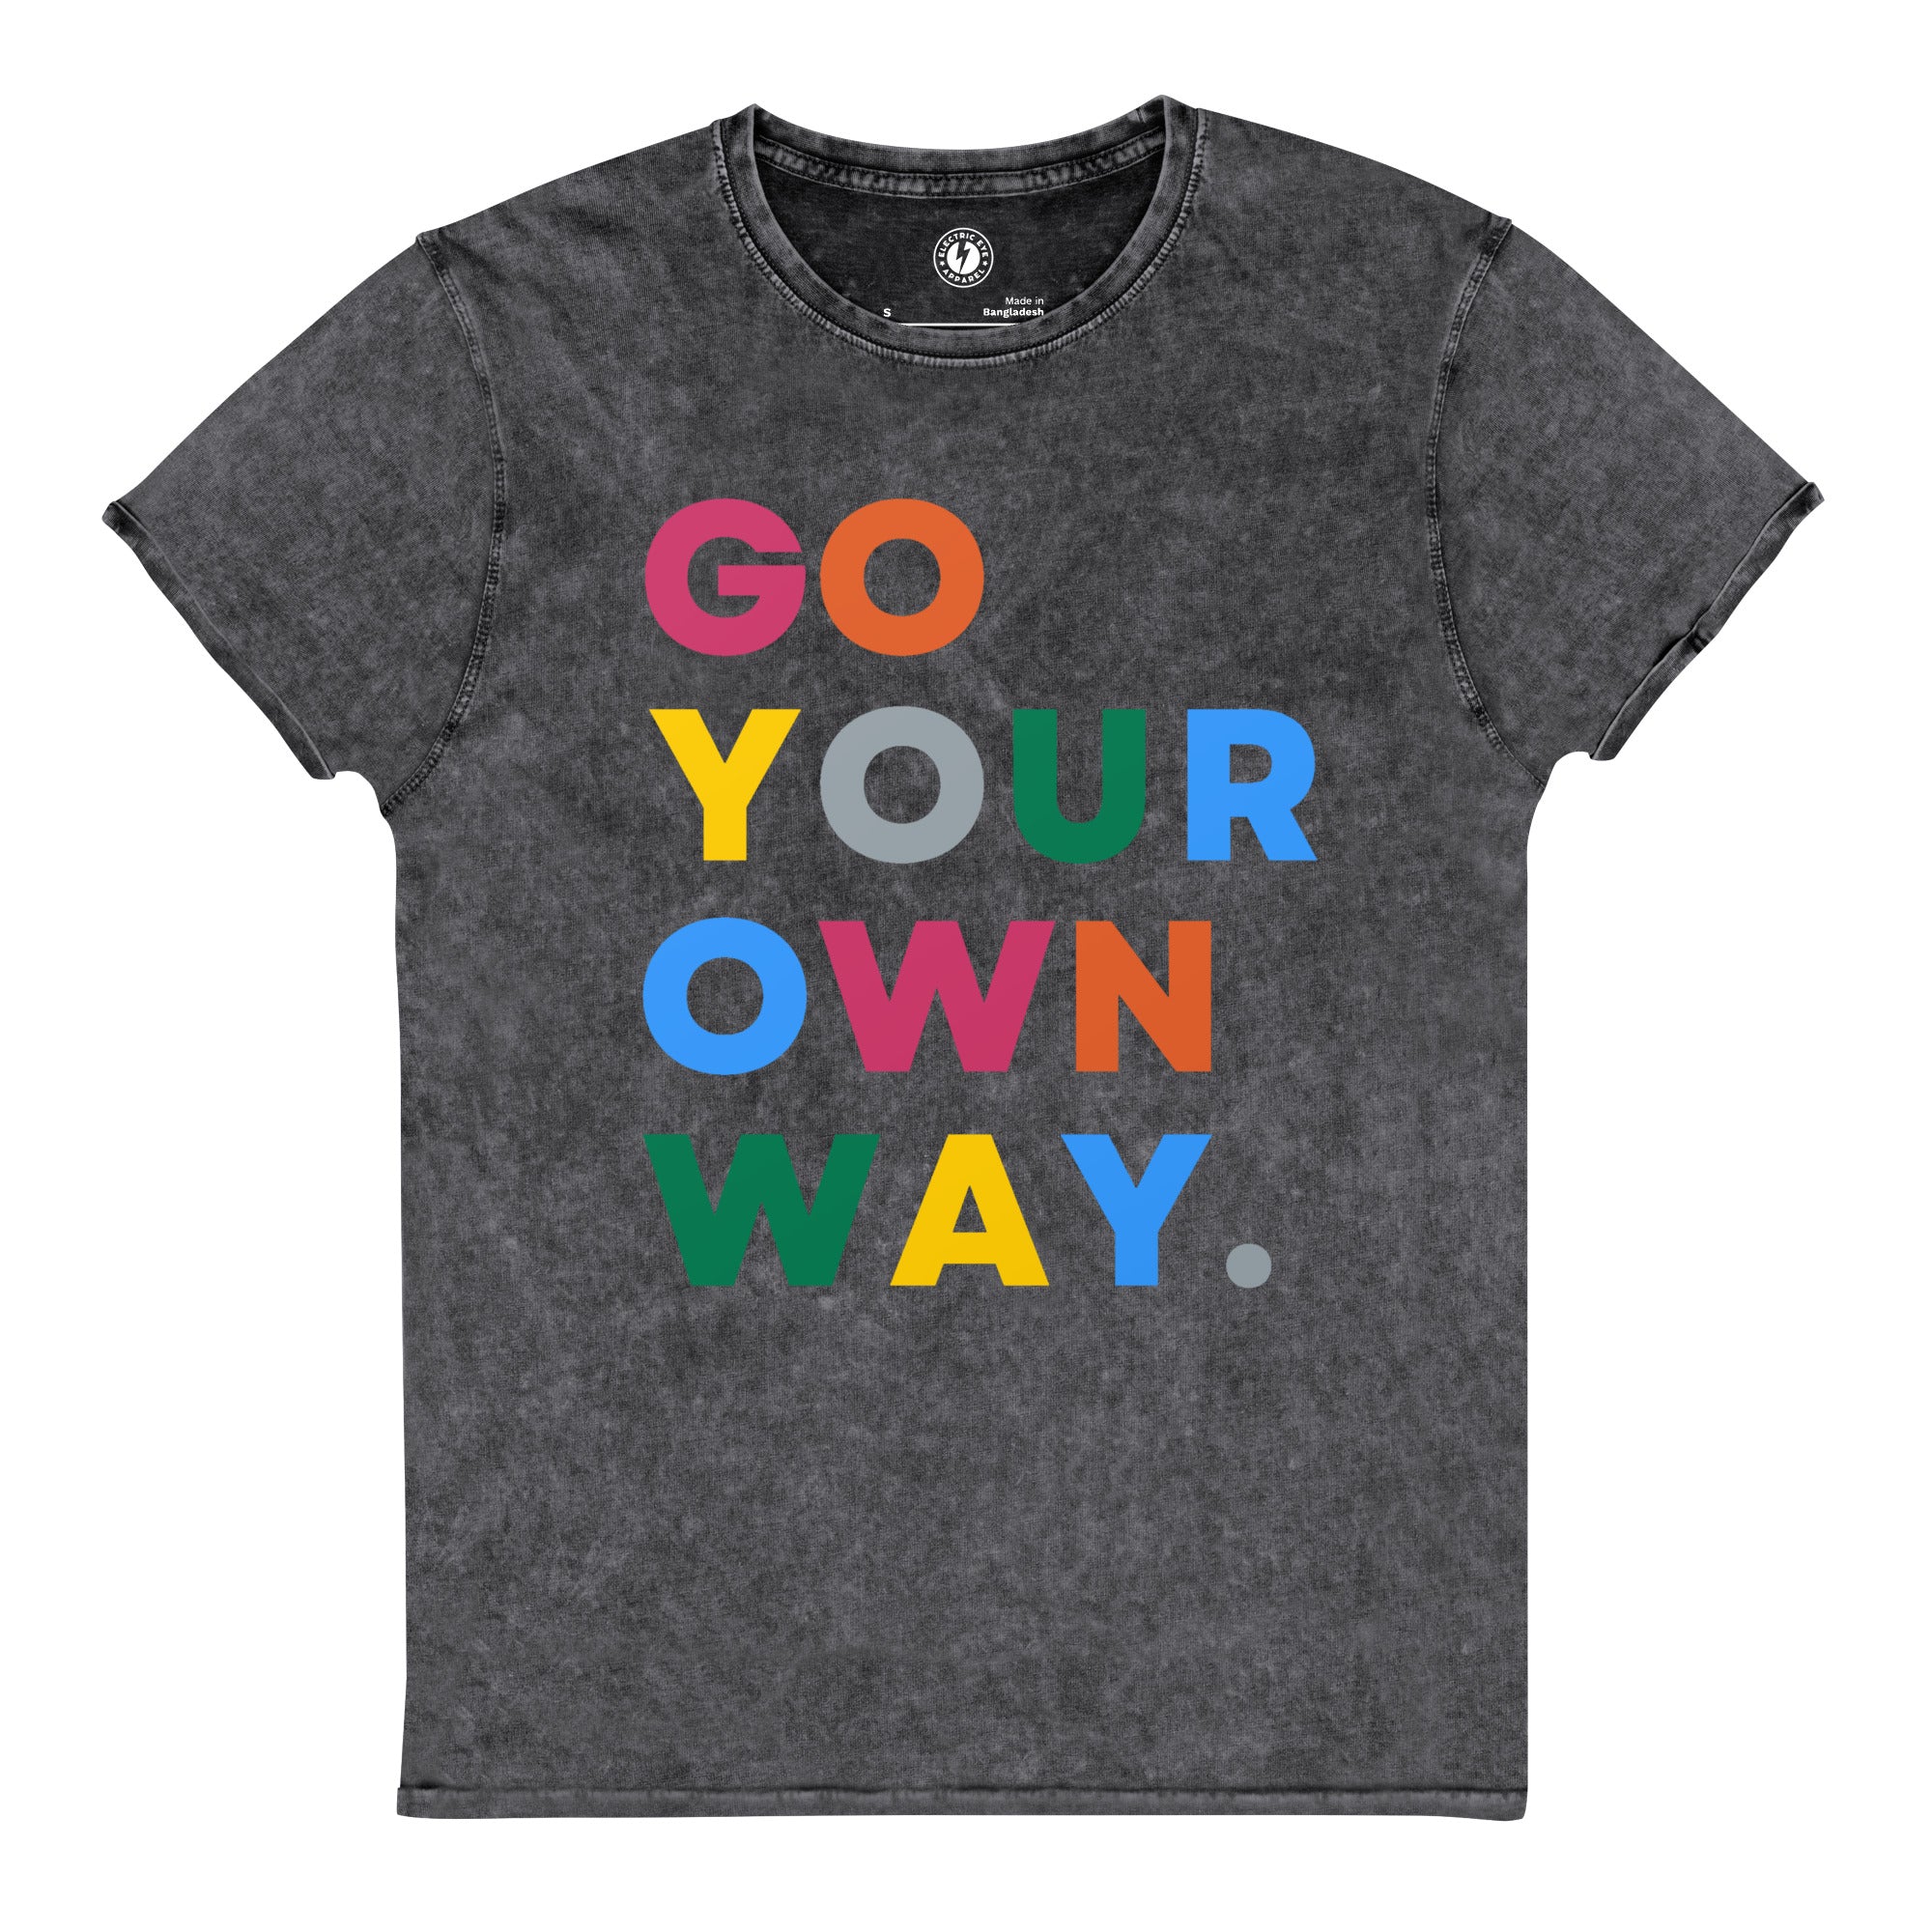 Go Your Own Way - Multicoloured Premium Printed Vintage Style Aged Unisex T-Shirt